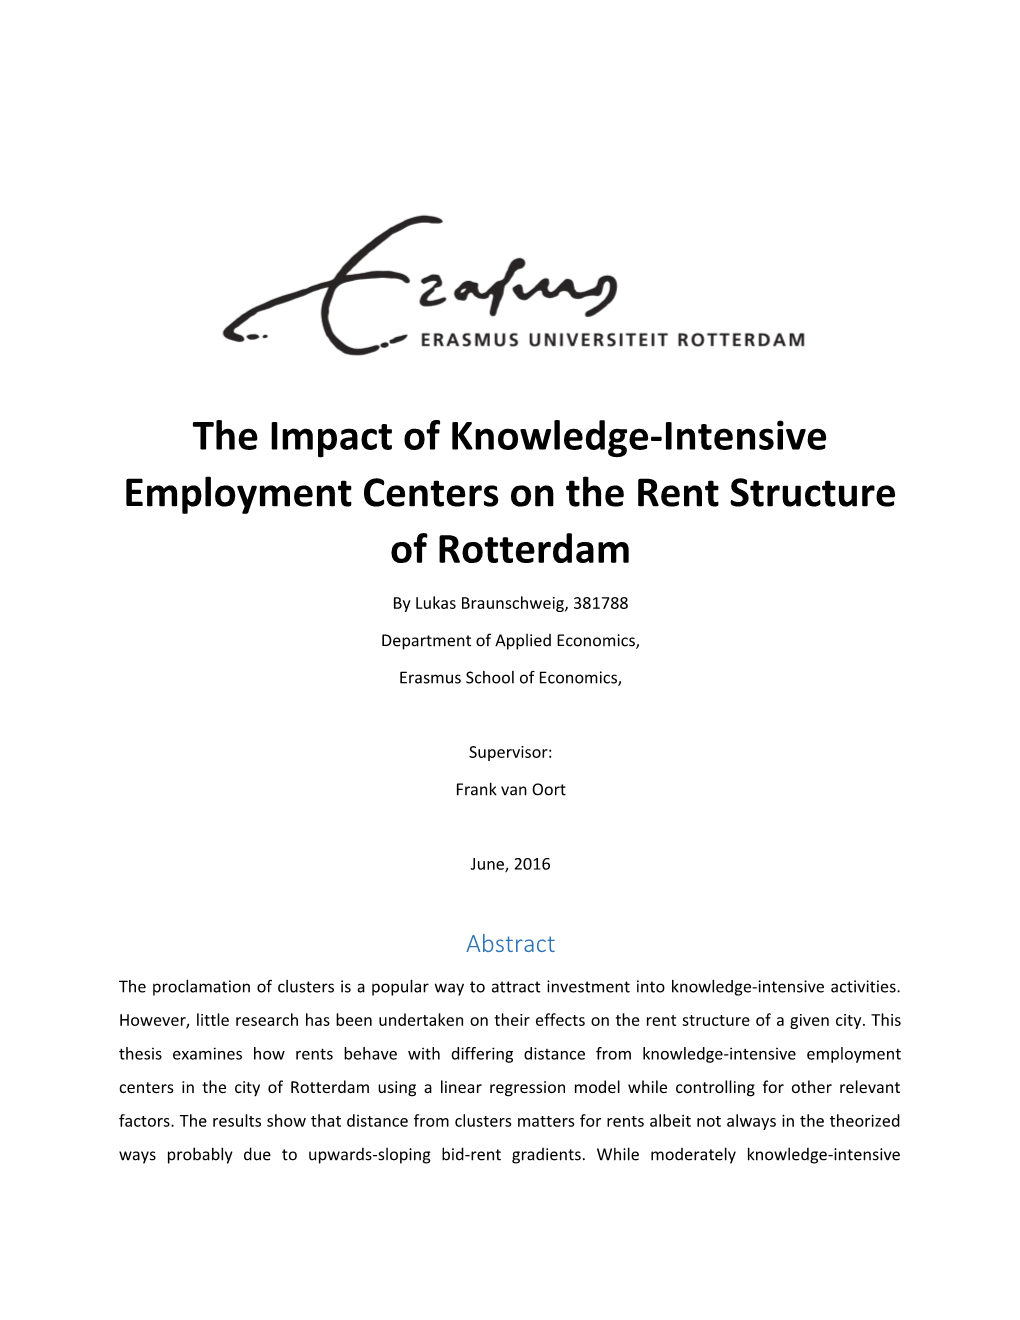 The Impact of Knowledge-Intensive Employment Centers on the Rent Structure of Rotterdam